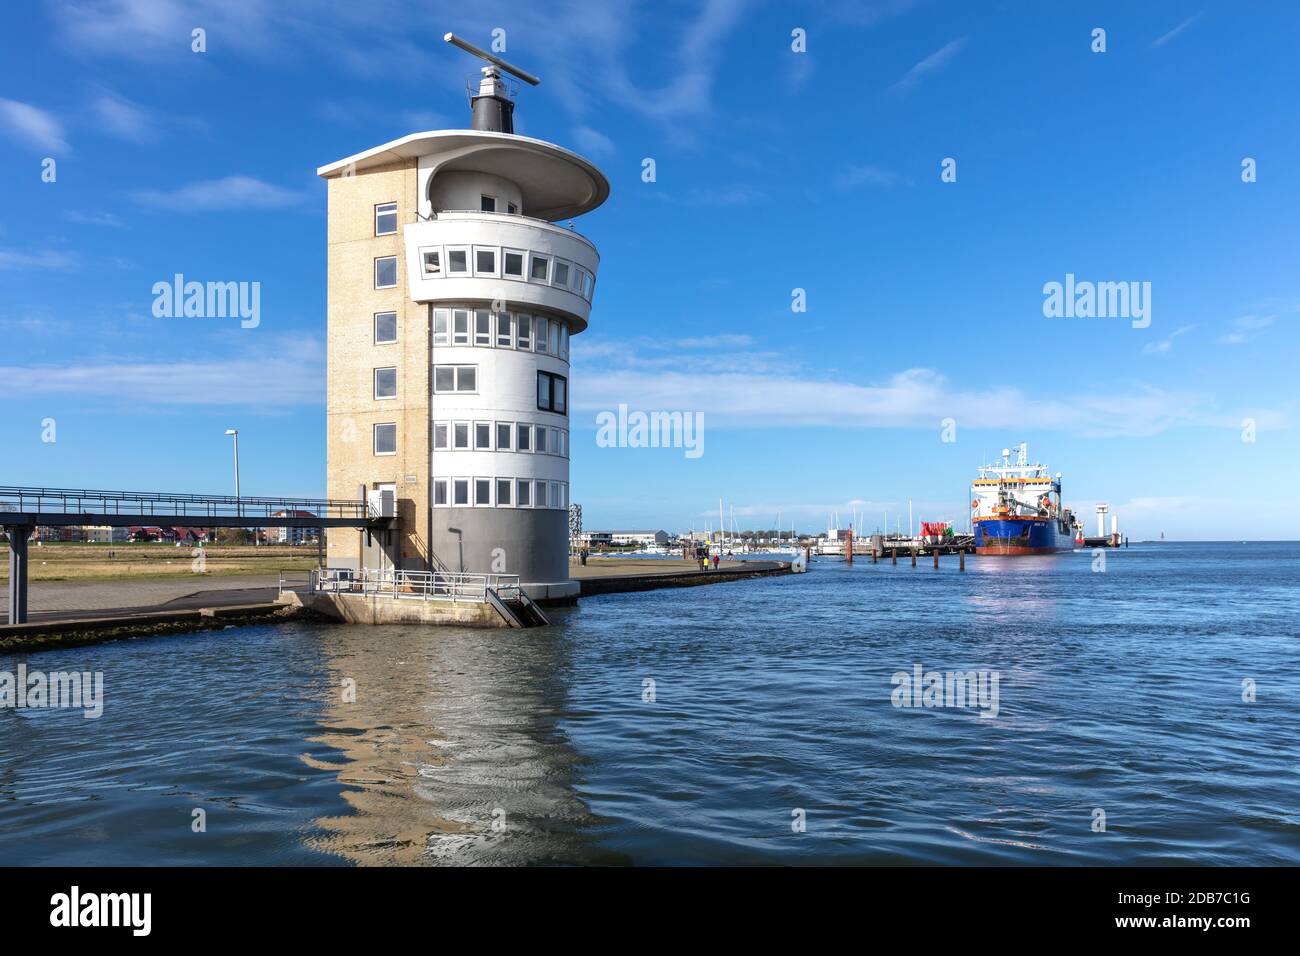 Radar tower in Cuxhaven, Germany at the river Elbe Stock Photo